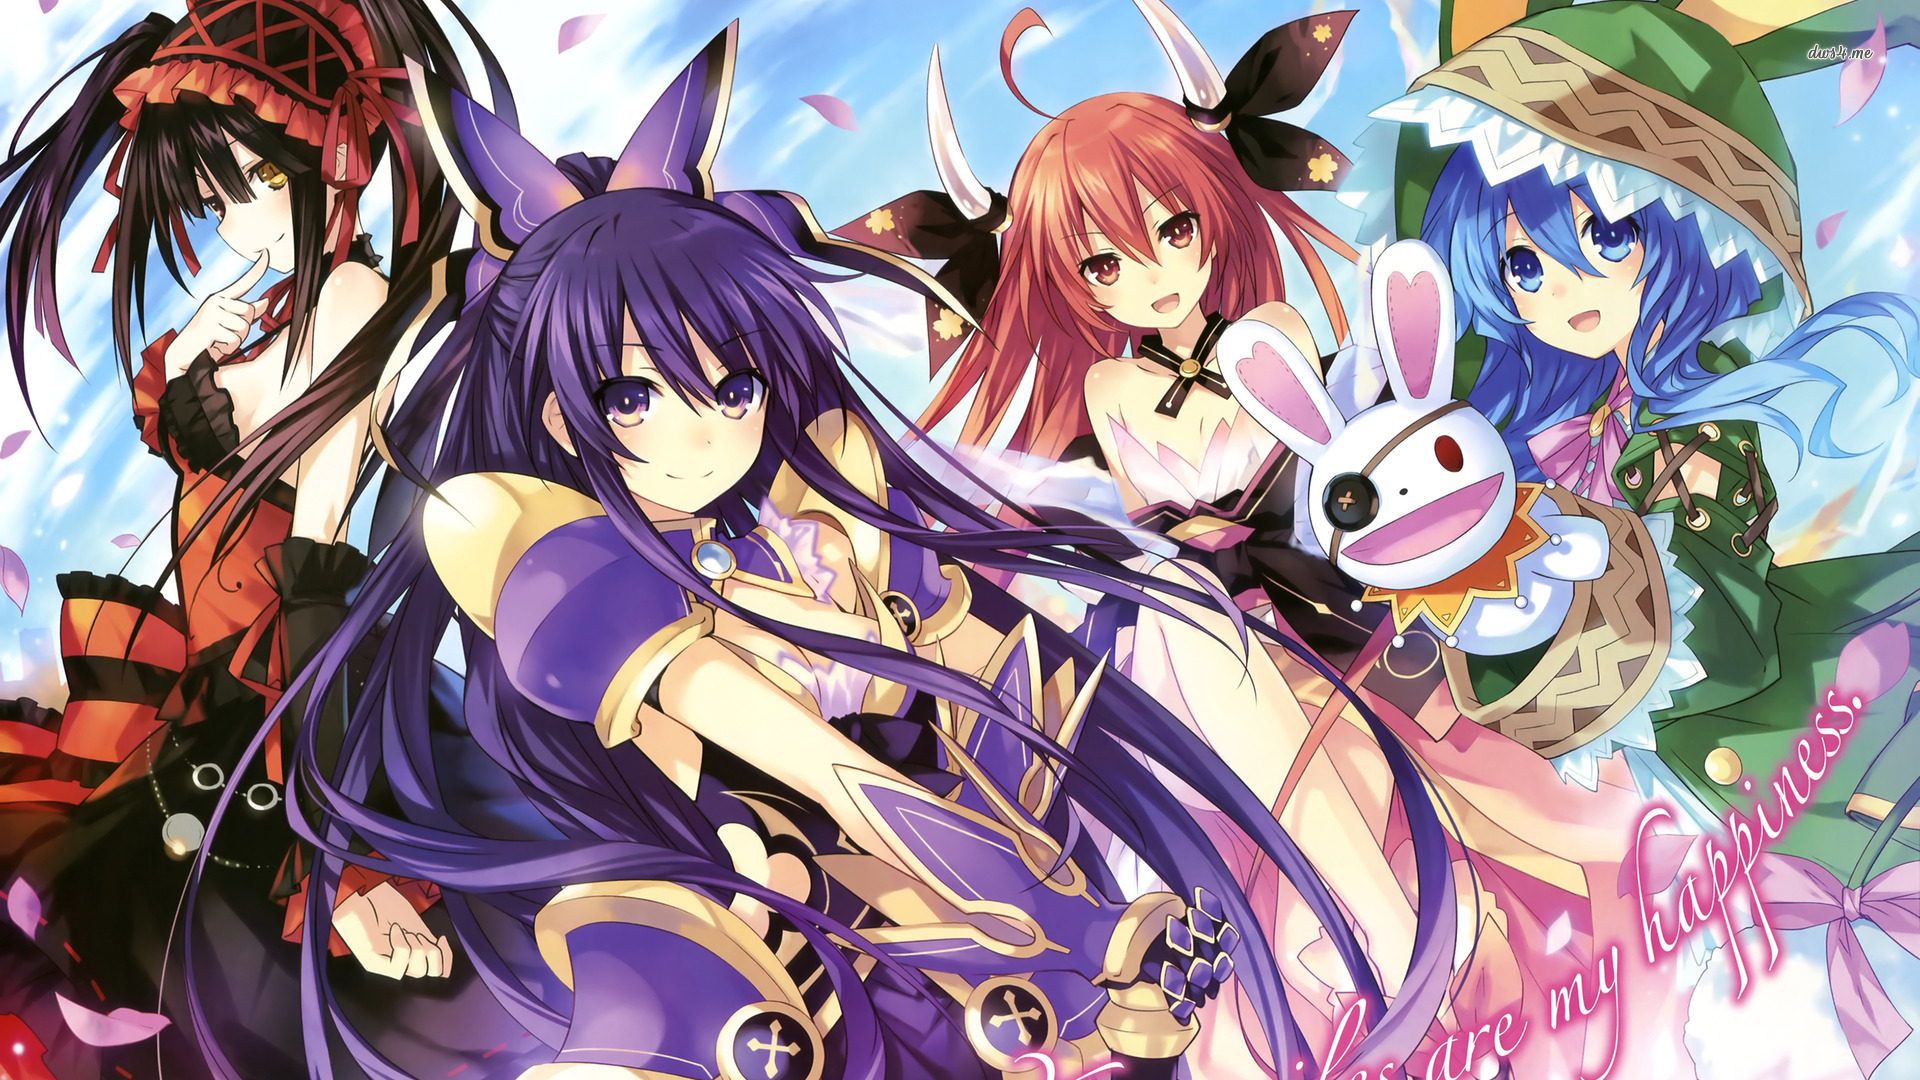 Date a Live wallpaper   Anime wallpapers   18563 1920x1080